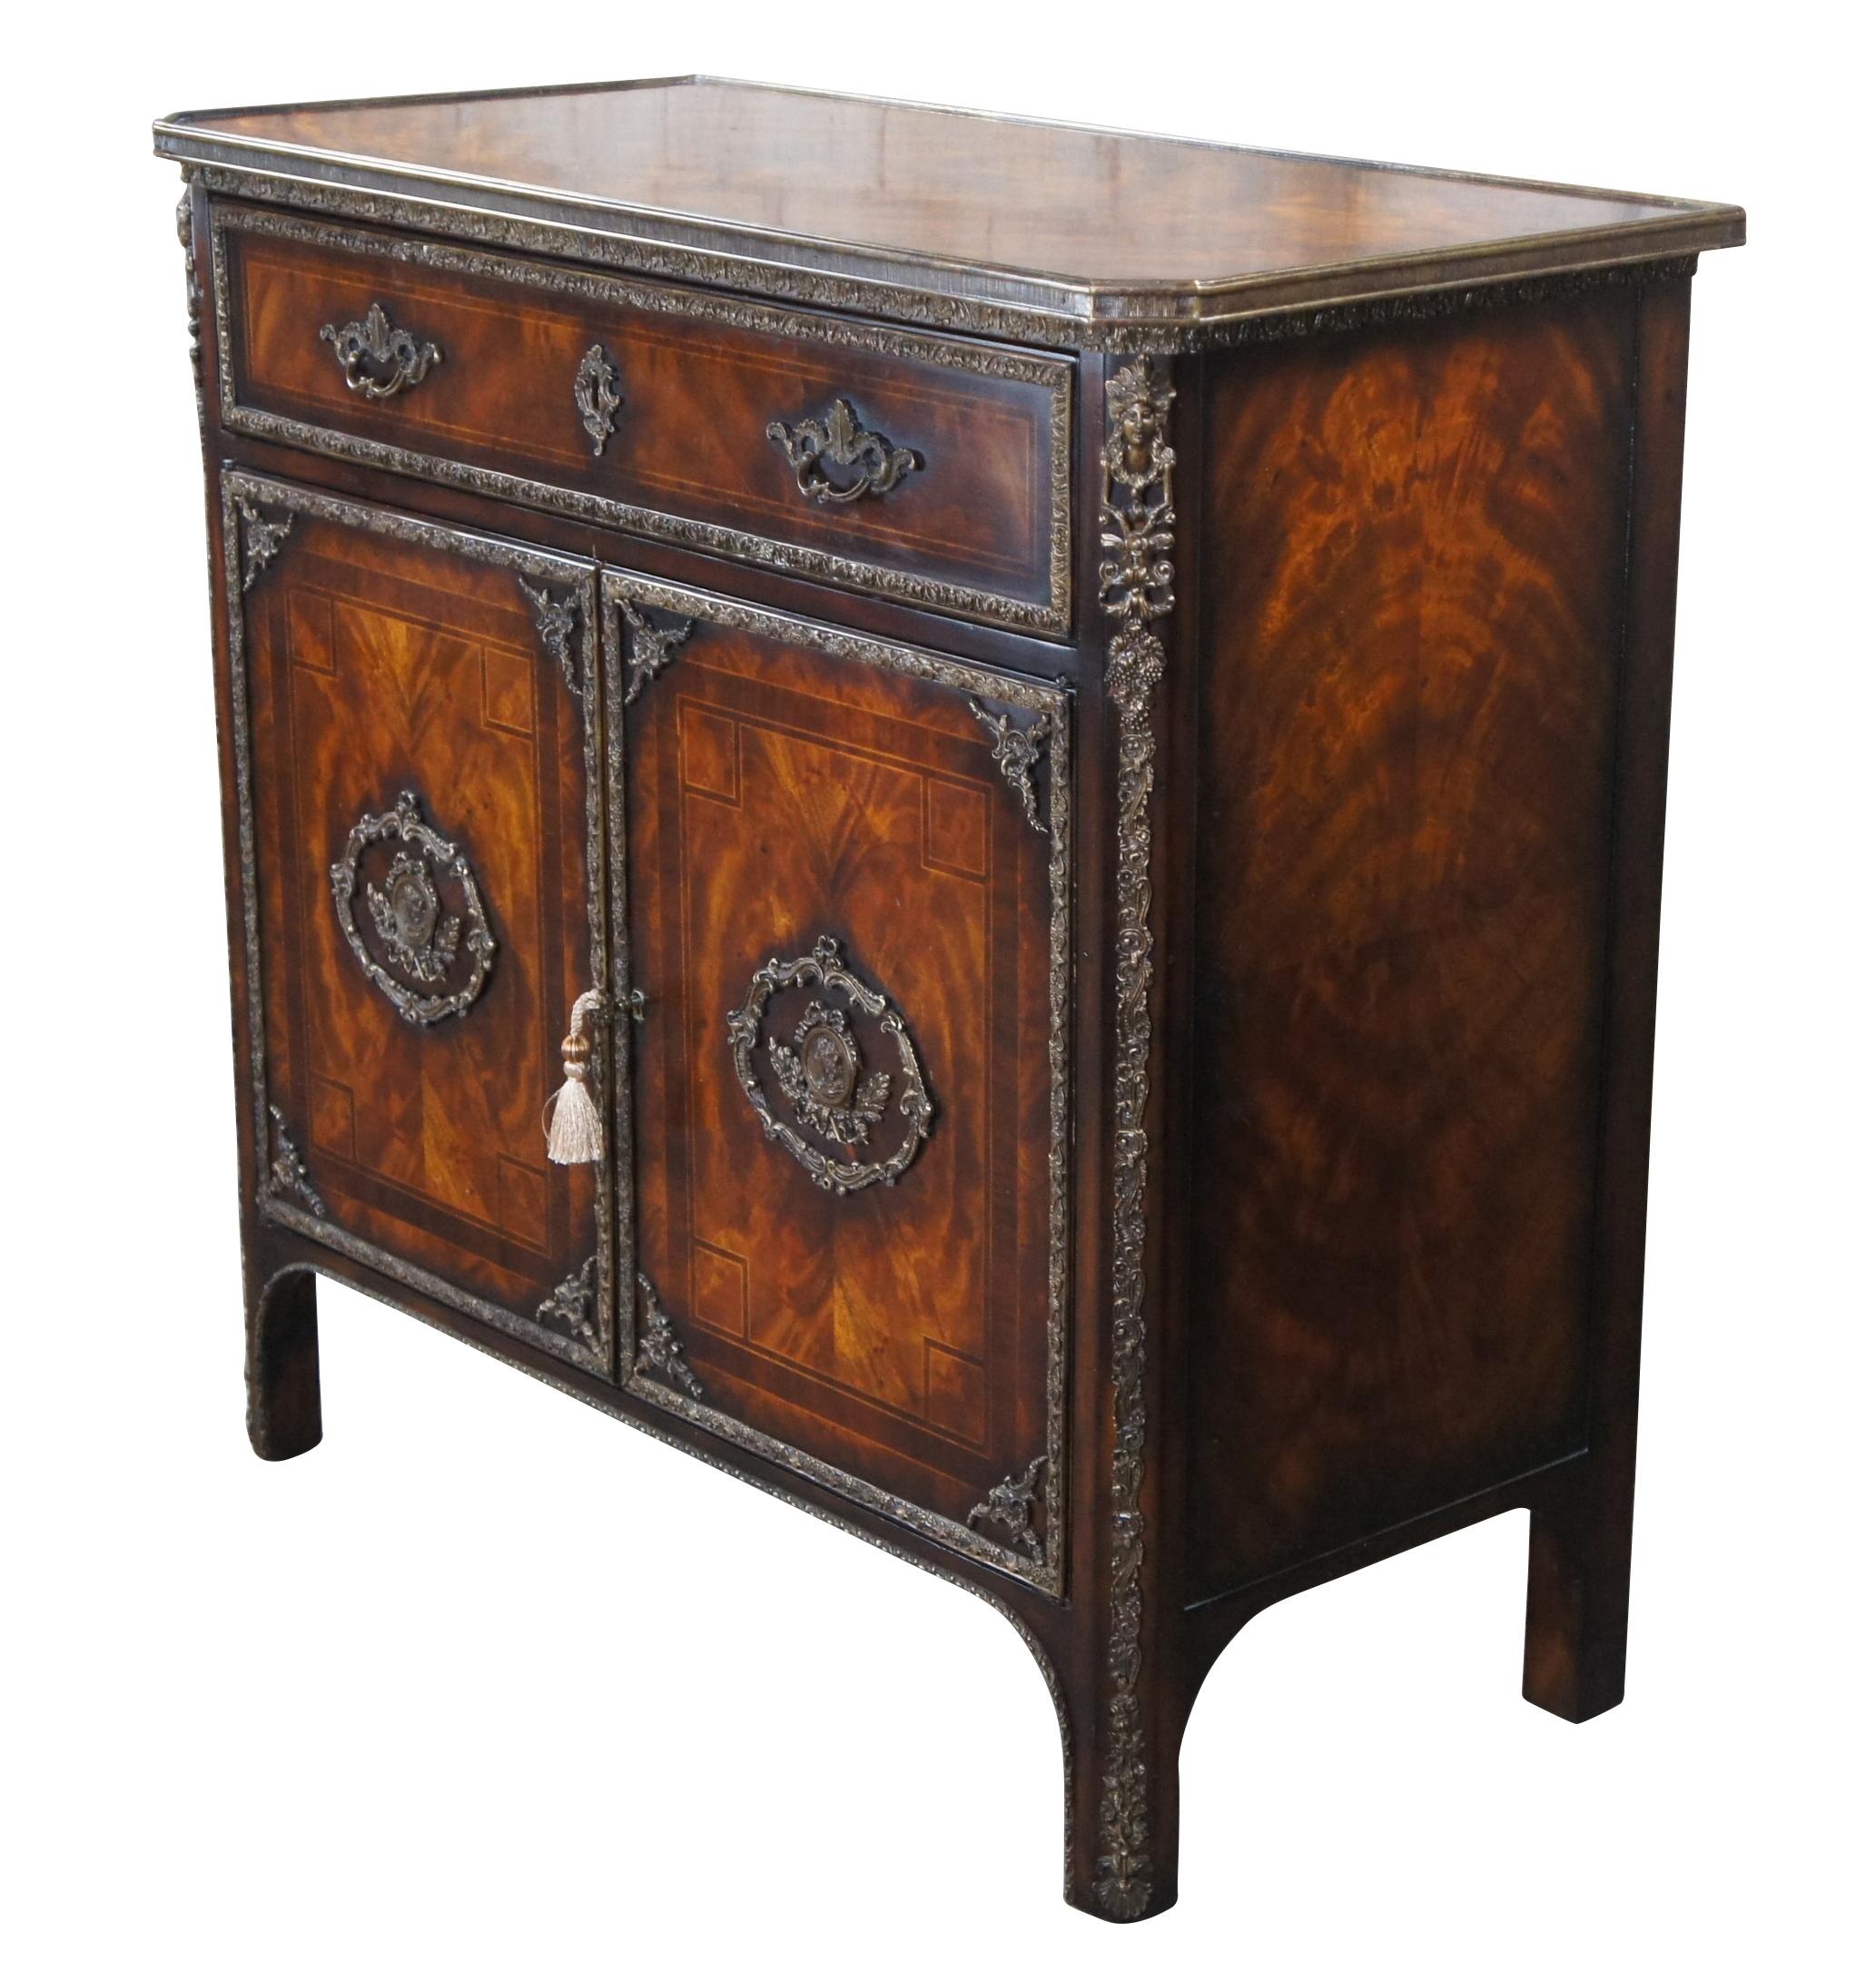 Theodore Alexander Althorp Console Flourish Cabinet / Console Table

The Flourish dining room side cabinet is a Louis XVI style flame mahogany ormolu mounted and banded cabinet with a rectangular brass bound top with canted corners above a long